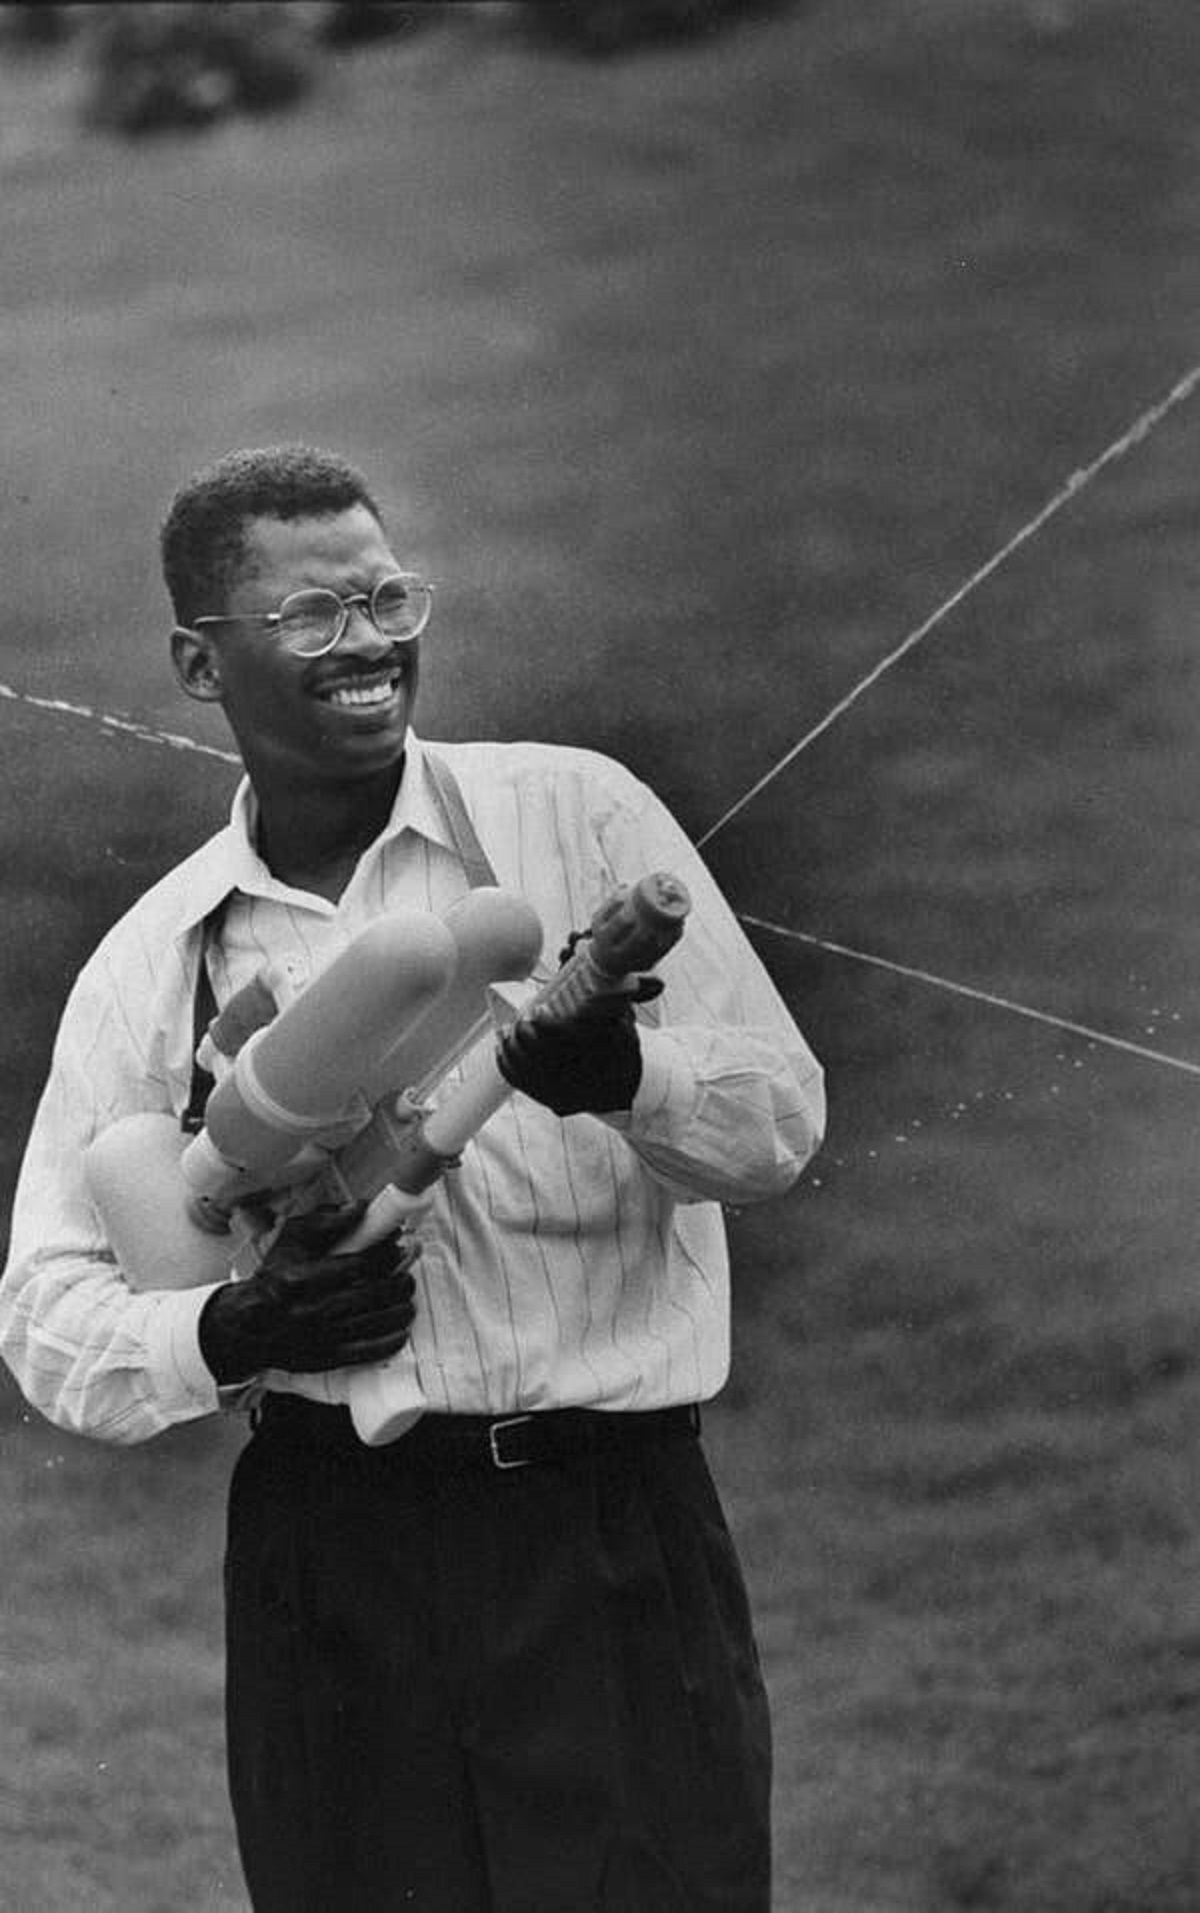 This is Lonnie Johnson, inventor of the Super Soaker, enjoying his invention: